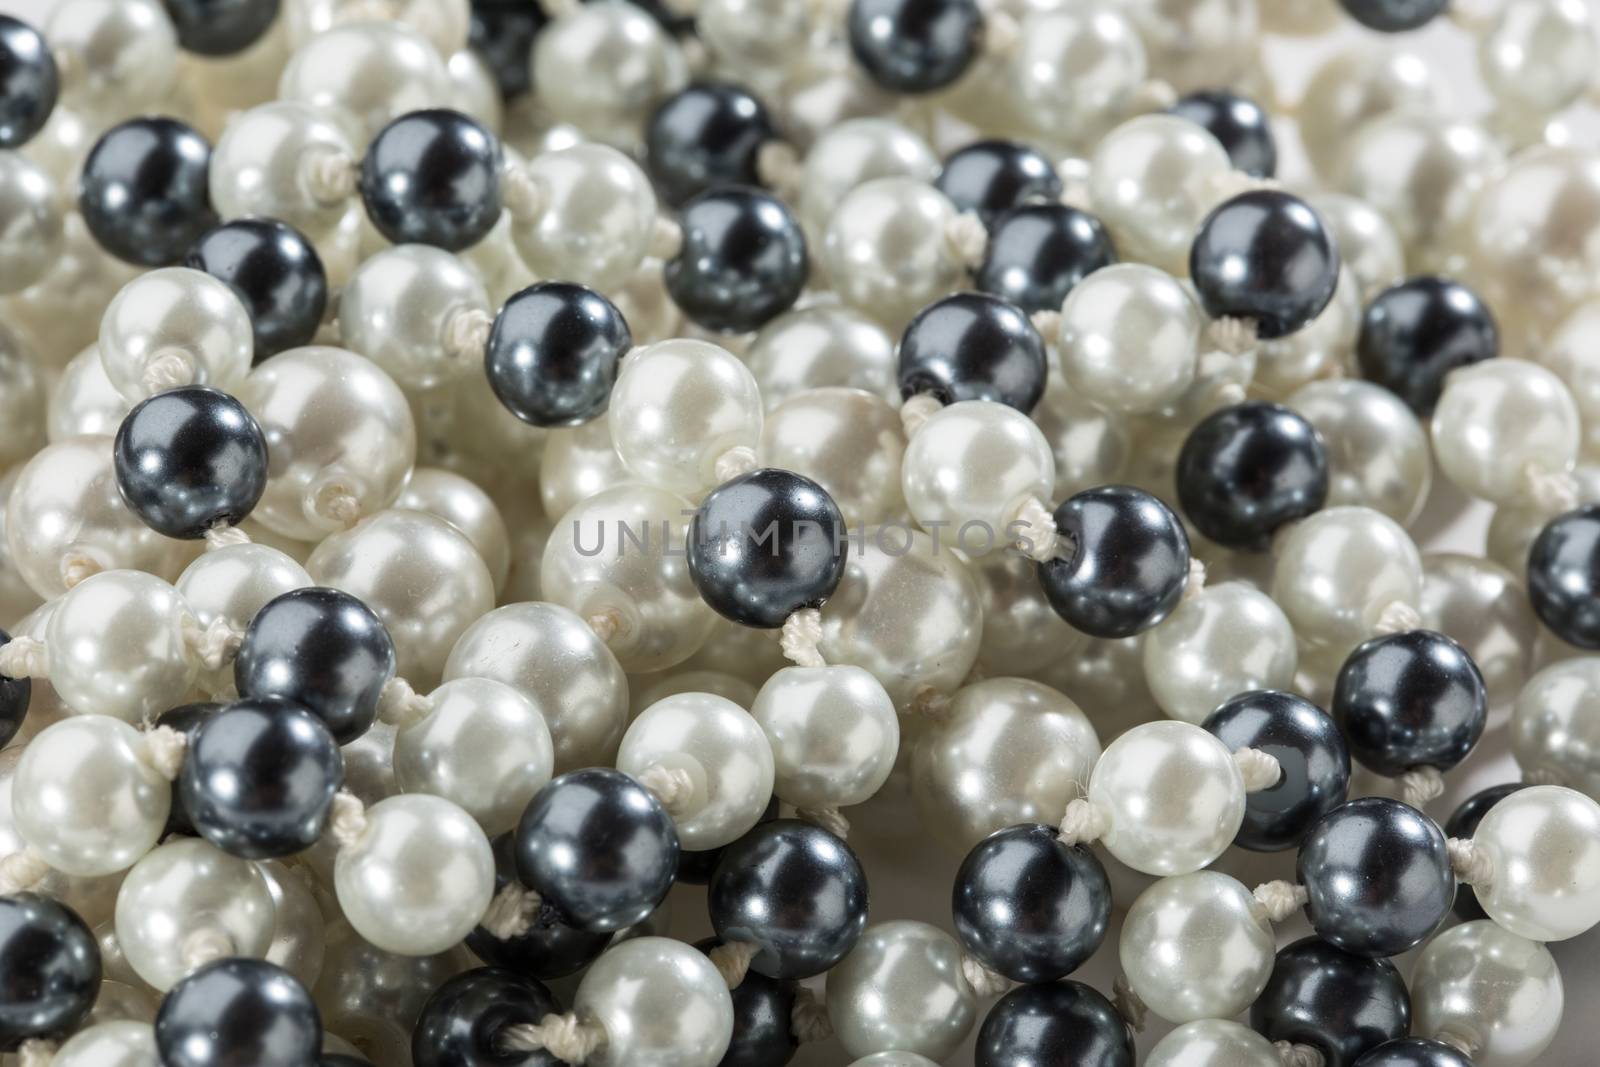 String of black and white pearls